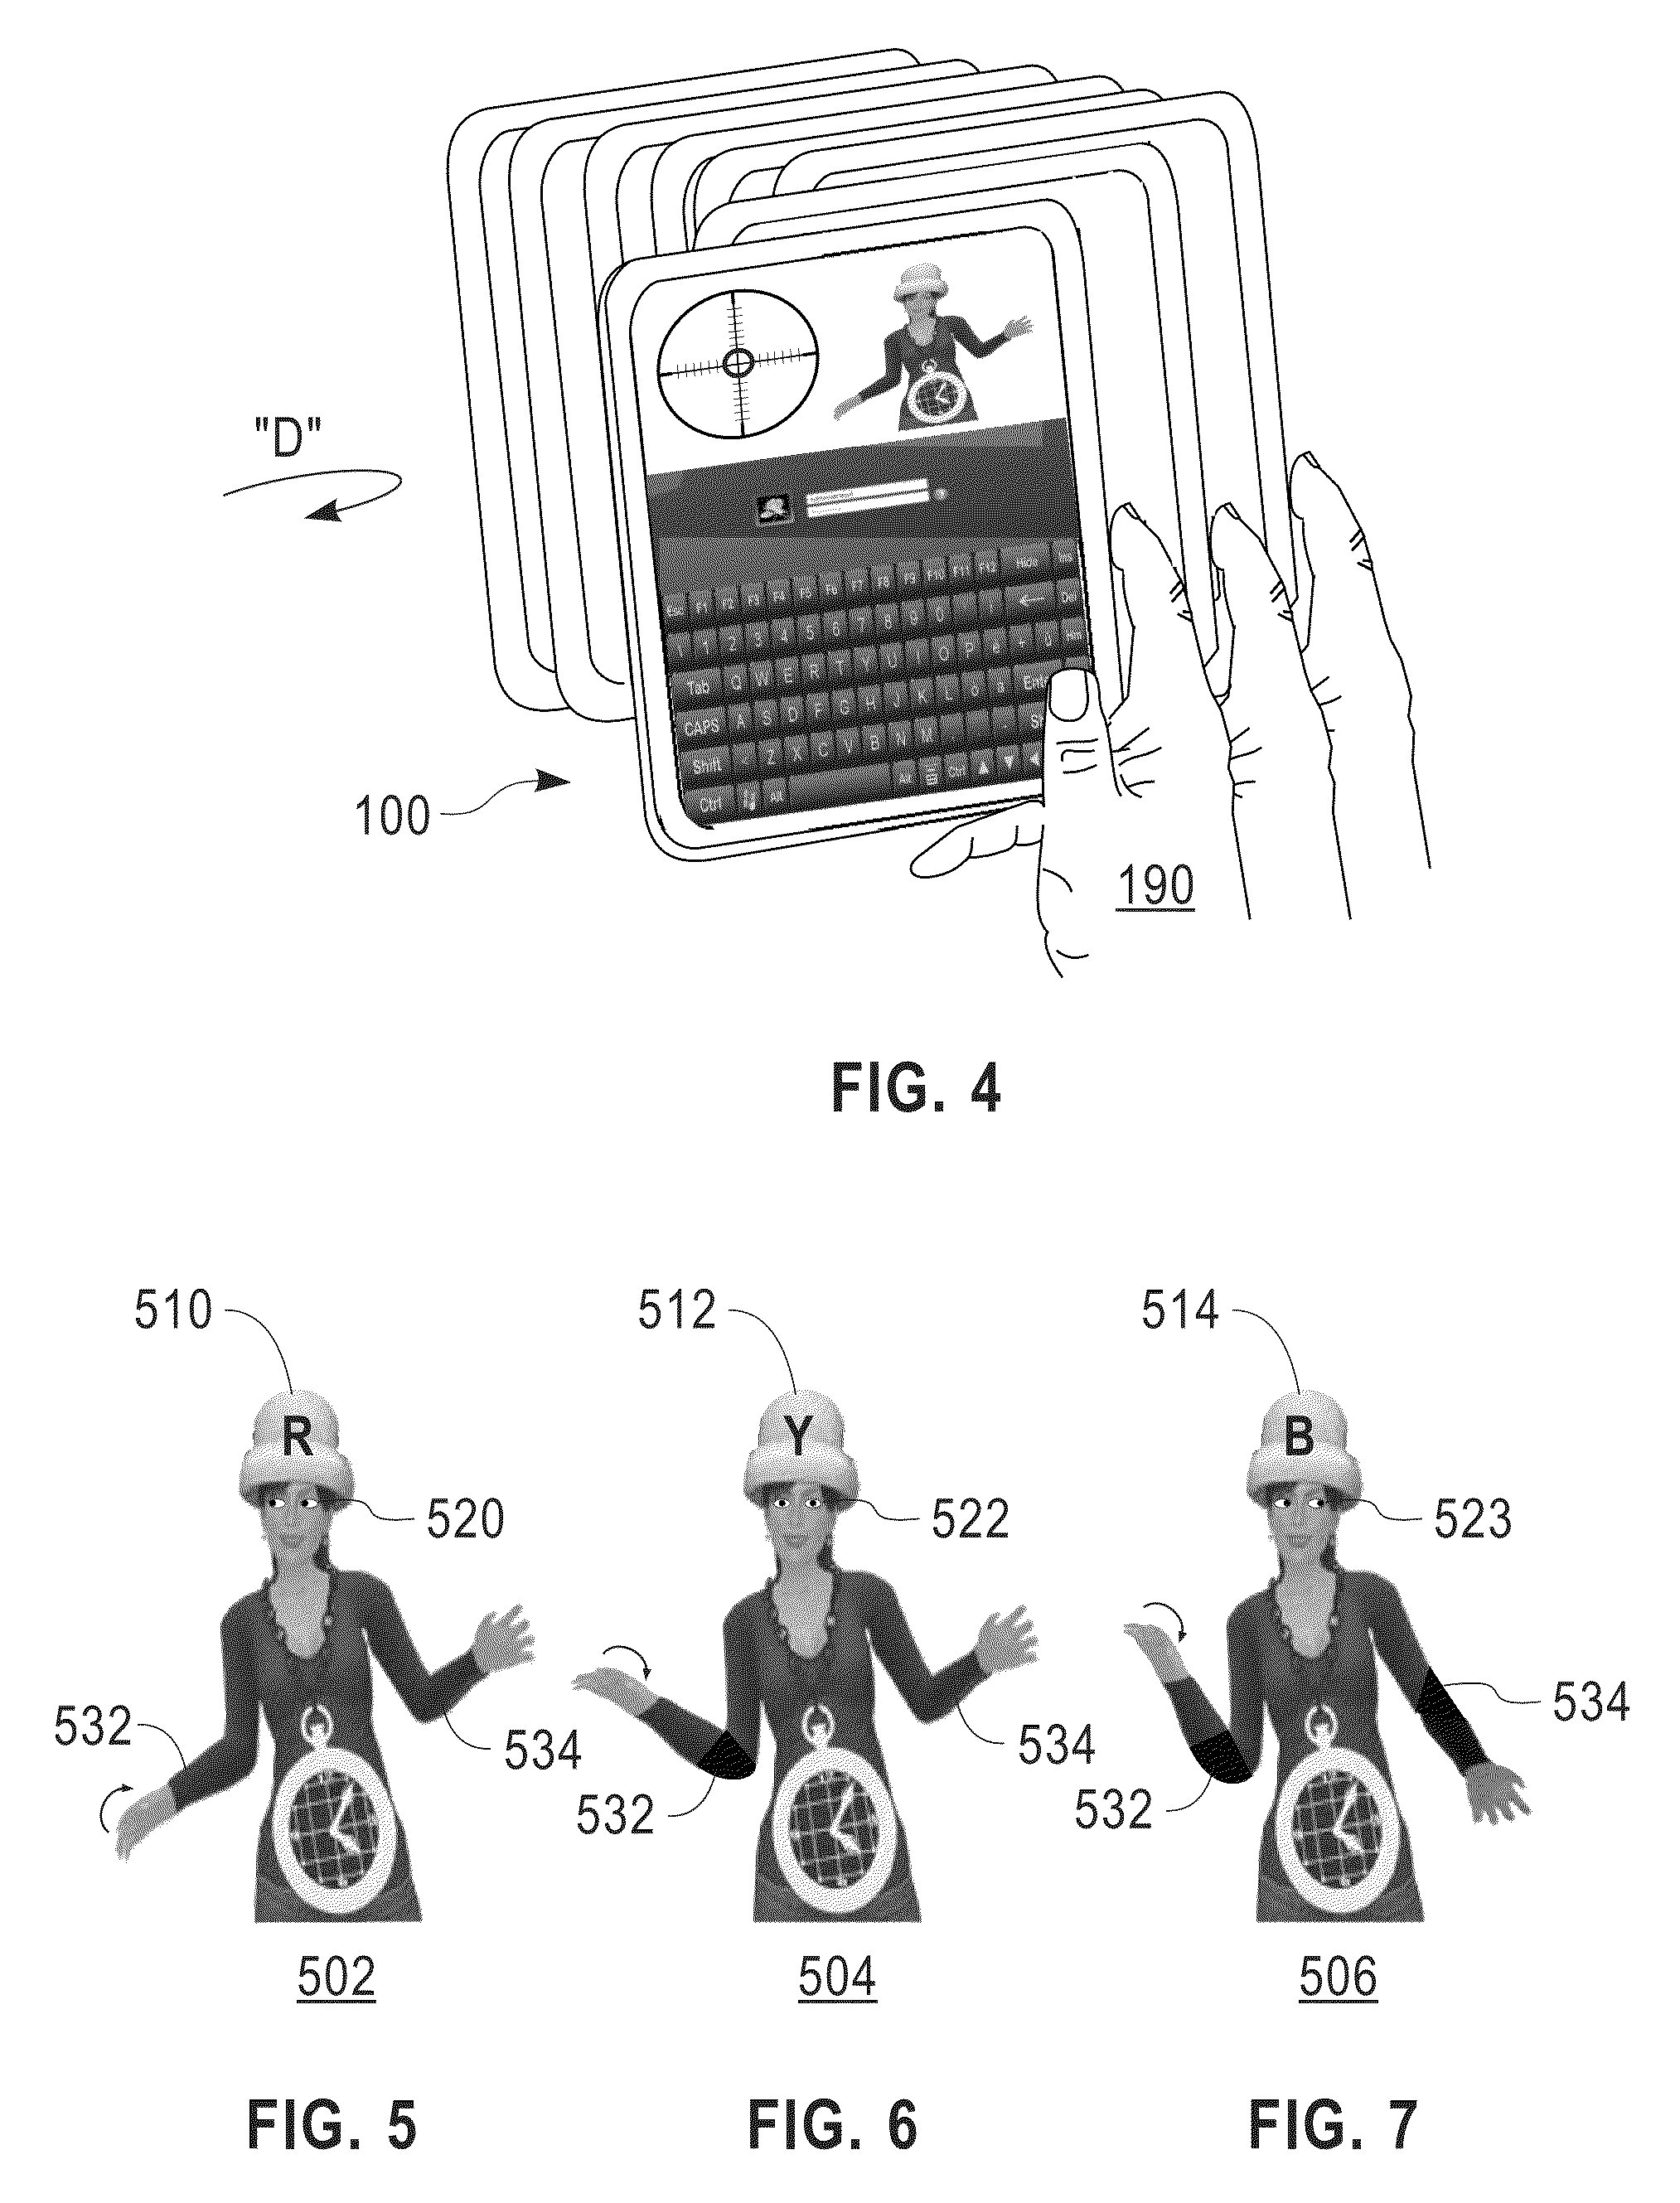 User access control based on handheld device orientation